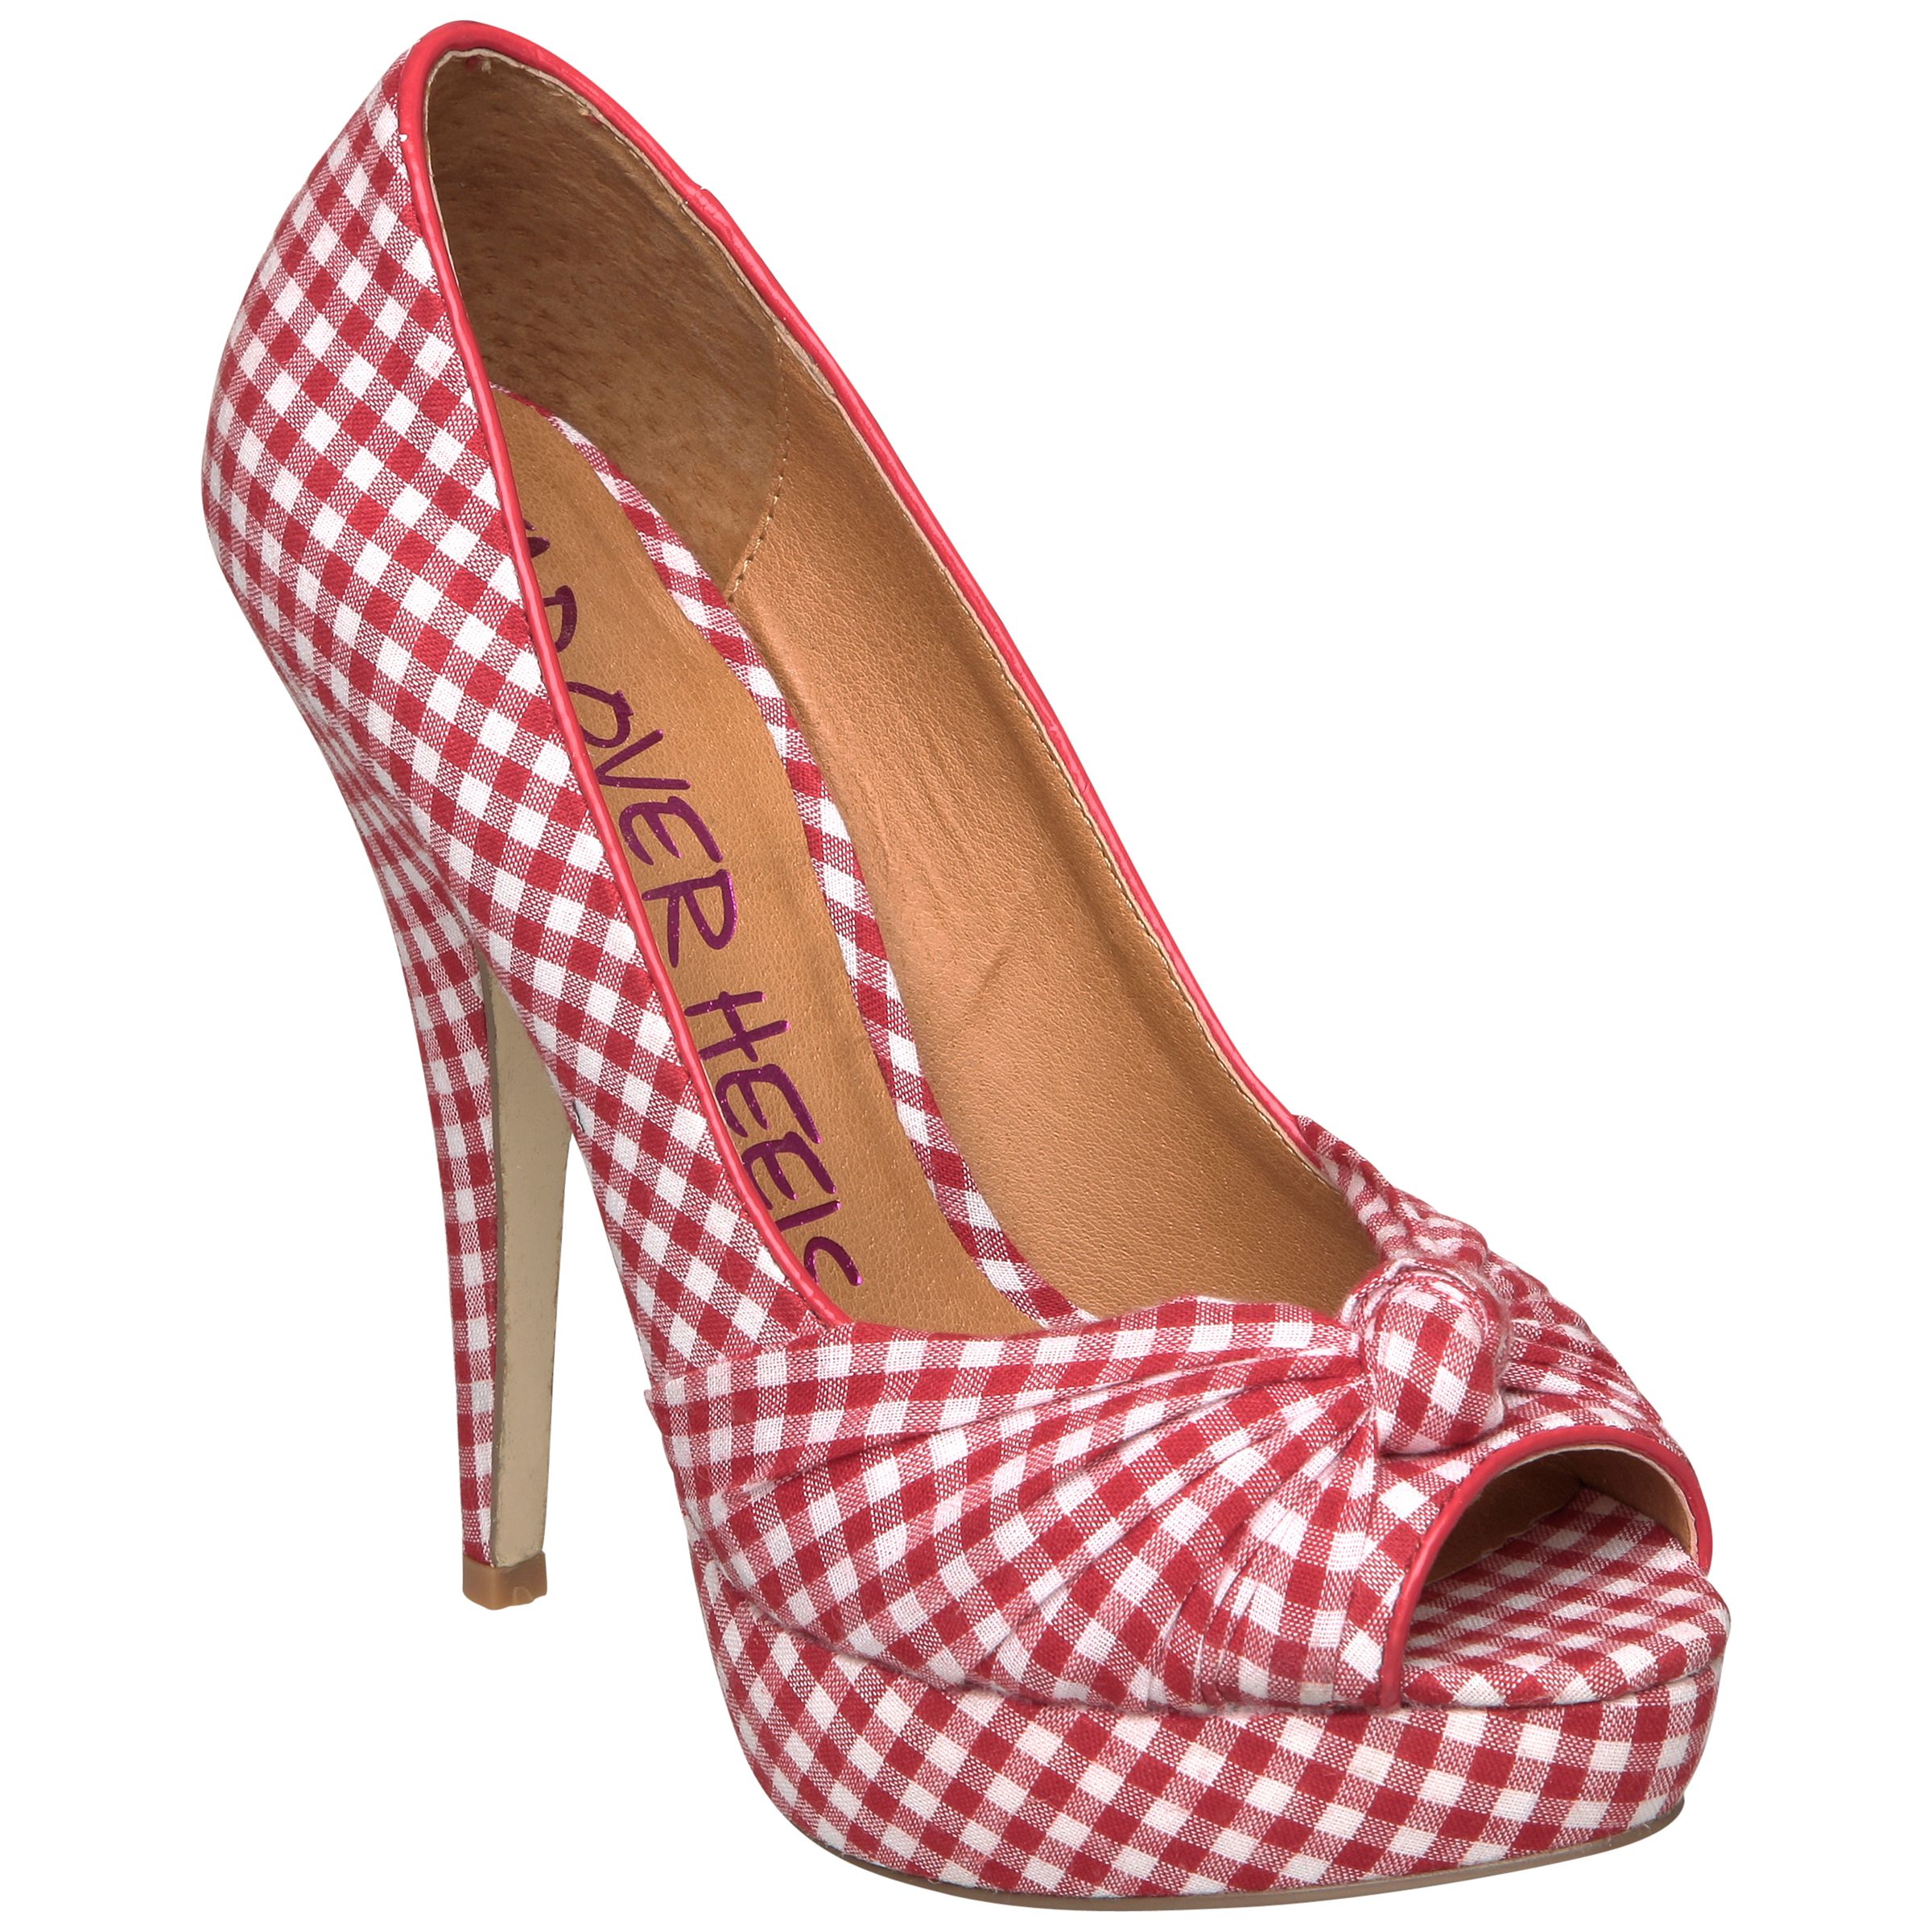  Court Shoes on Stiletto Court Shoes  Red Online At Johnlewis Com   John Lewis